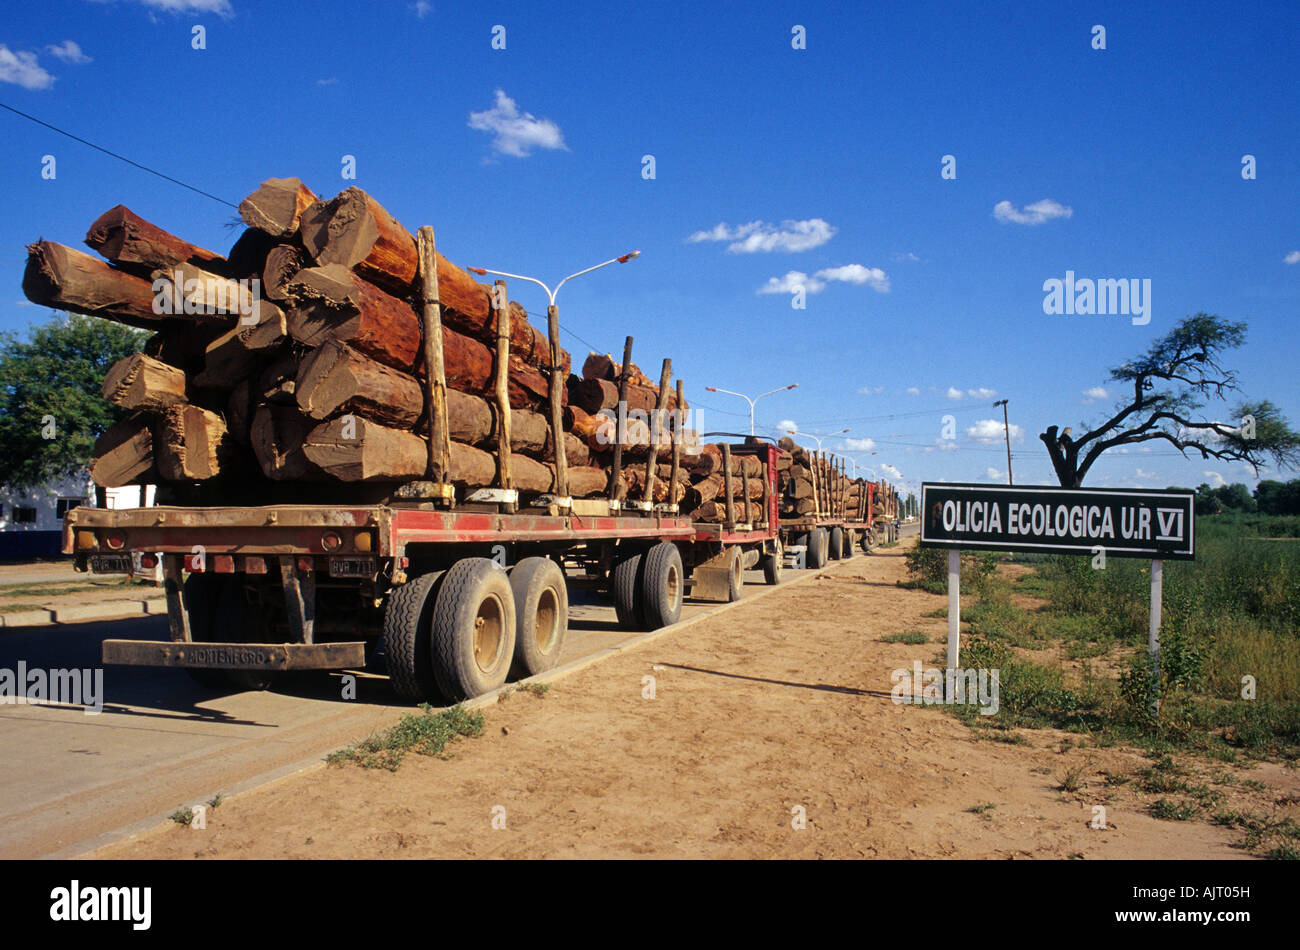 Big cargo trucks with quebracho trees trunks. An image of deforestation. Chaco, Argentina Stock Photo